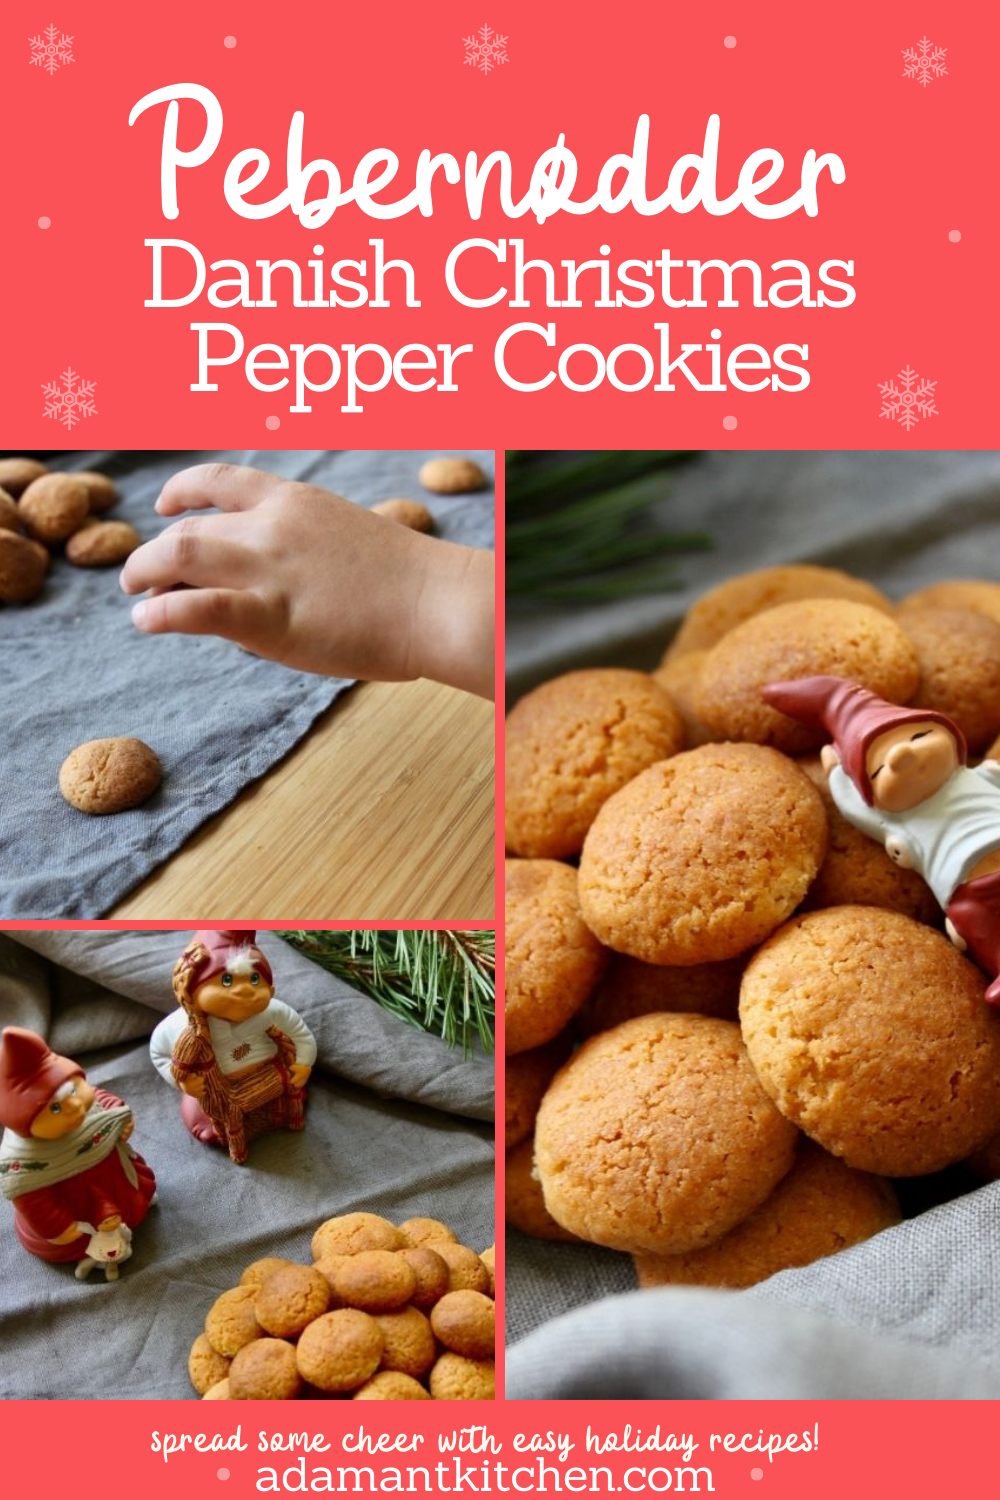 Danish Pebernødder ~ Learn how to make this traditional Scandinavian Christmas cookie from scratch.